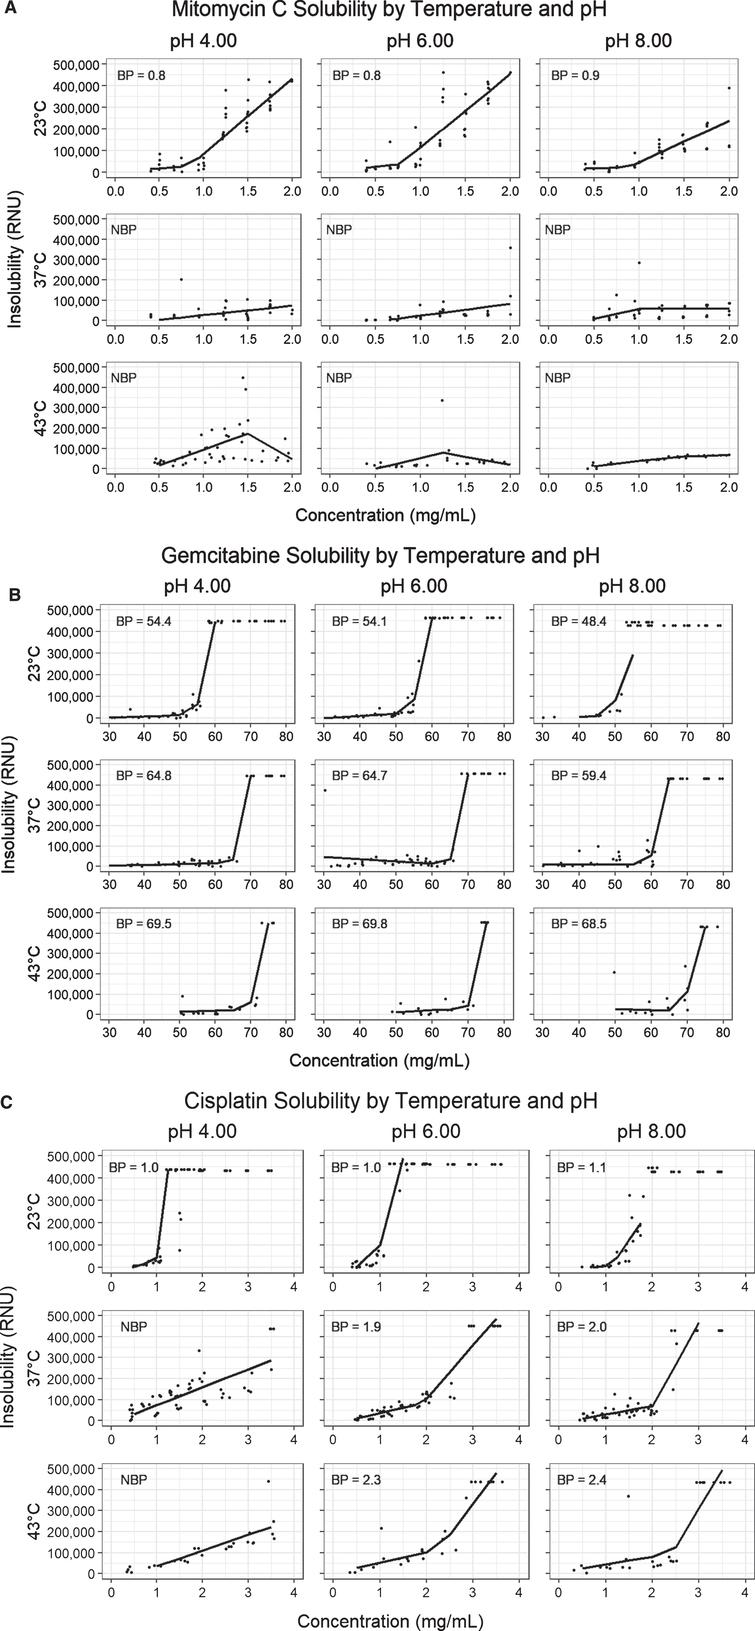 Solubility plots and segmental regressions by temperature and pH for Mitomycin C (A), Gemcitabine (B), and Cisplatin (C). Each row of solubility plots representing a temperature (23°C, 37°C, 43°C), and each column a pH (4.00, 6.00, 8.00). The included breakpoints represent estimated kinetic solubility points derived from segmental linear regressions, all in mg/mL. Abbreviations: BP = Breakpoint, NBP = No breakpoint calculated (no clear inflection point of solubility plot).